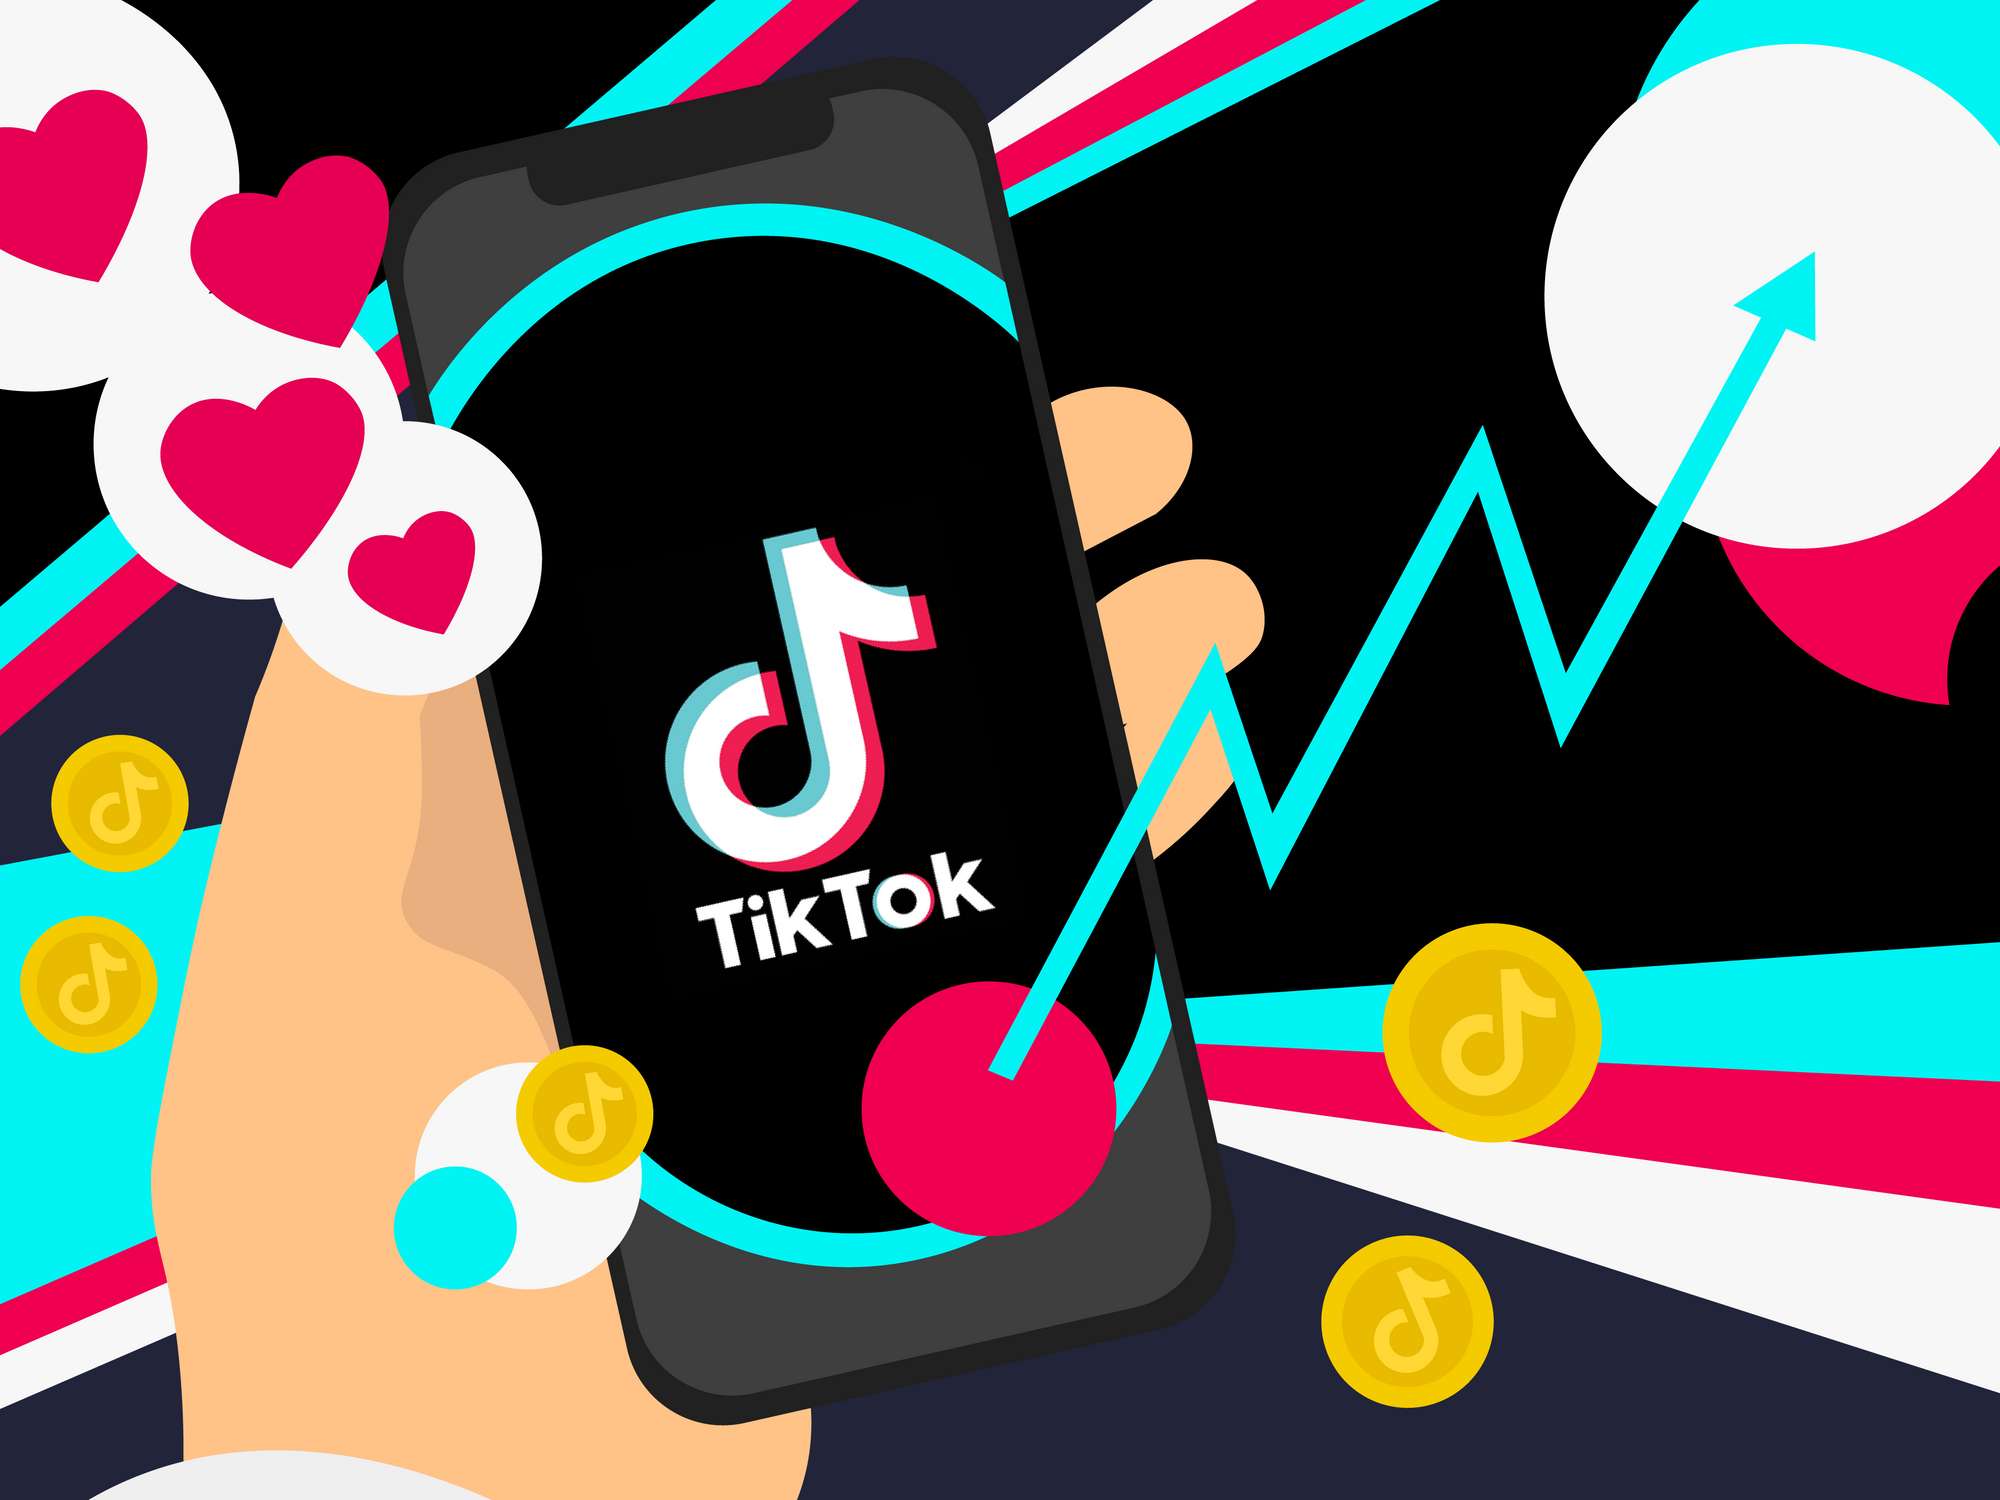 Is TikTok bad? Here's why many Western countries are taking a closer look